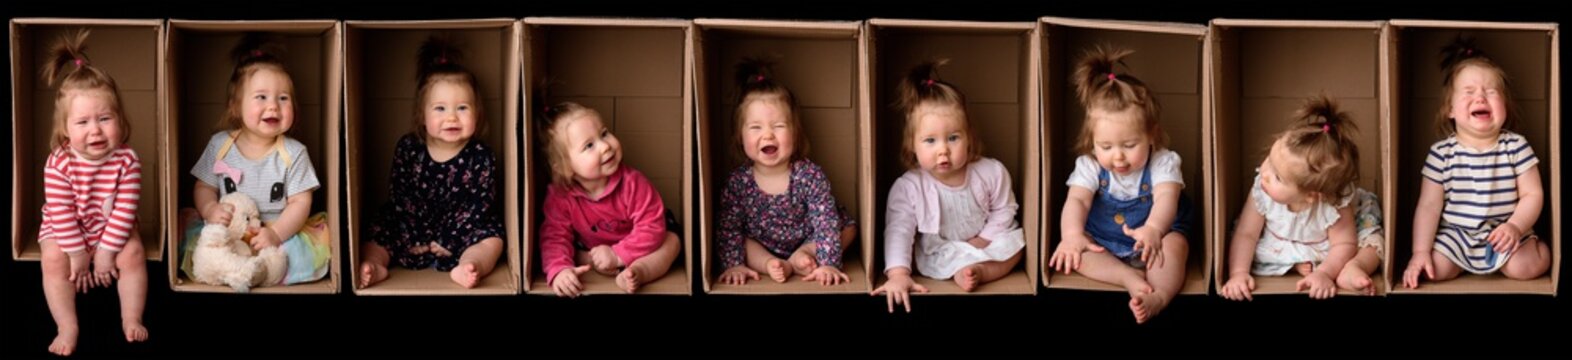 Collage of 9 photos with a little girl in a cardboard box. The girl expresses different emotions and is dressed in different clothes